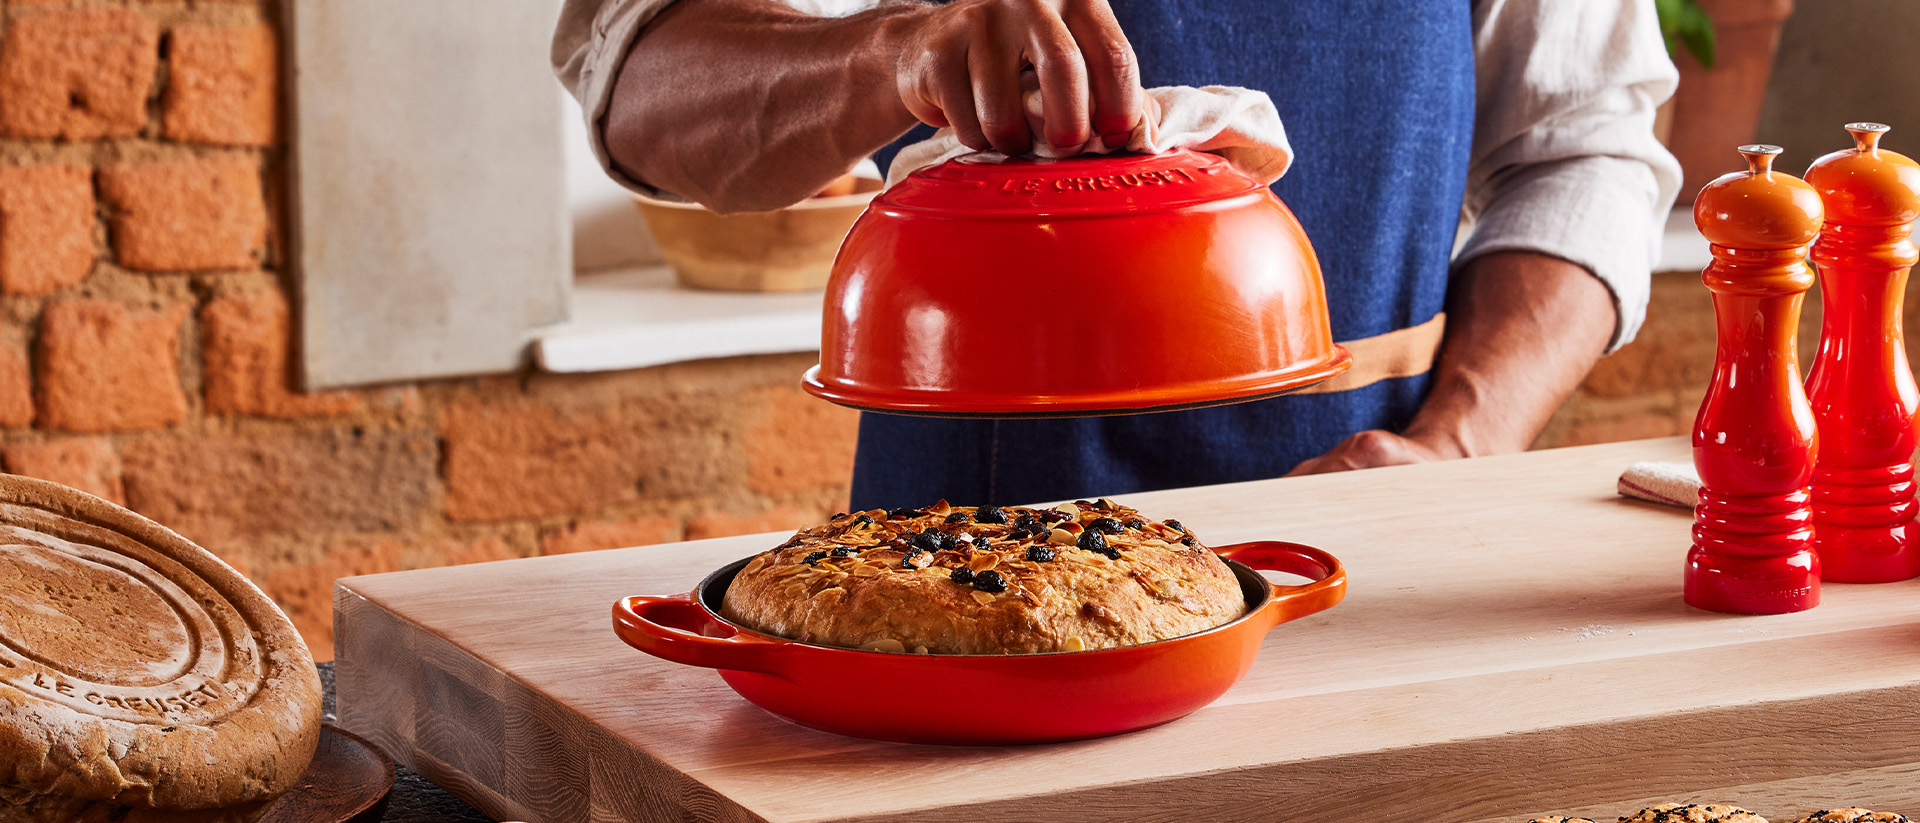 Le Creuset's New Bread Oven Achieves a Perfectly Crusty Loaf